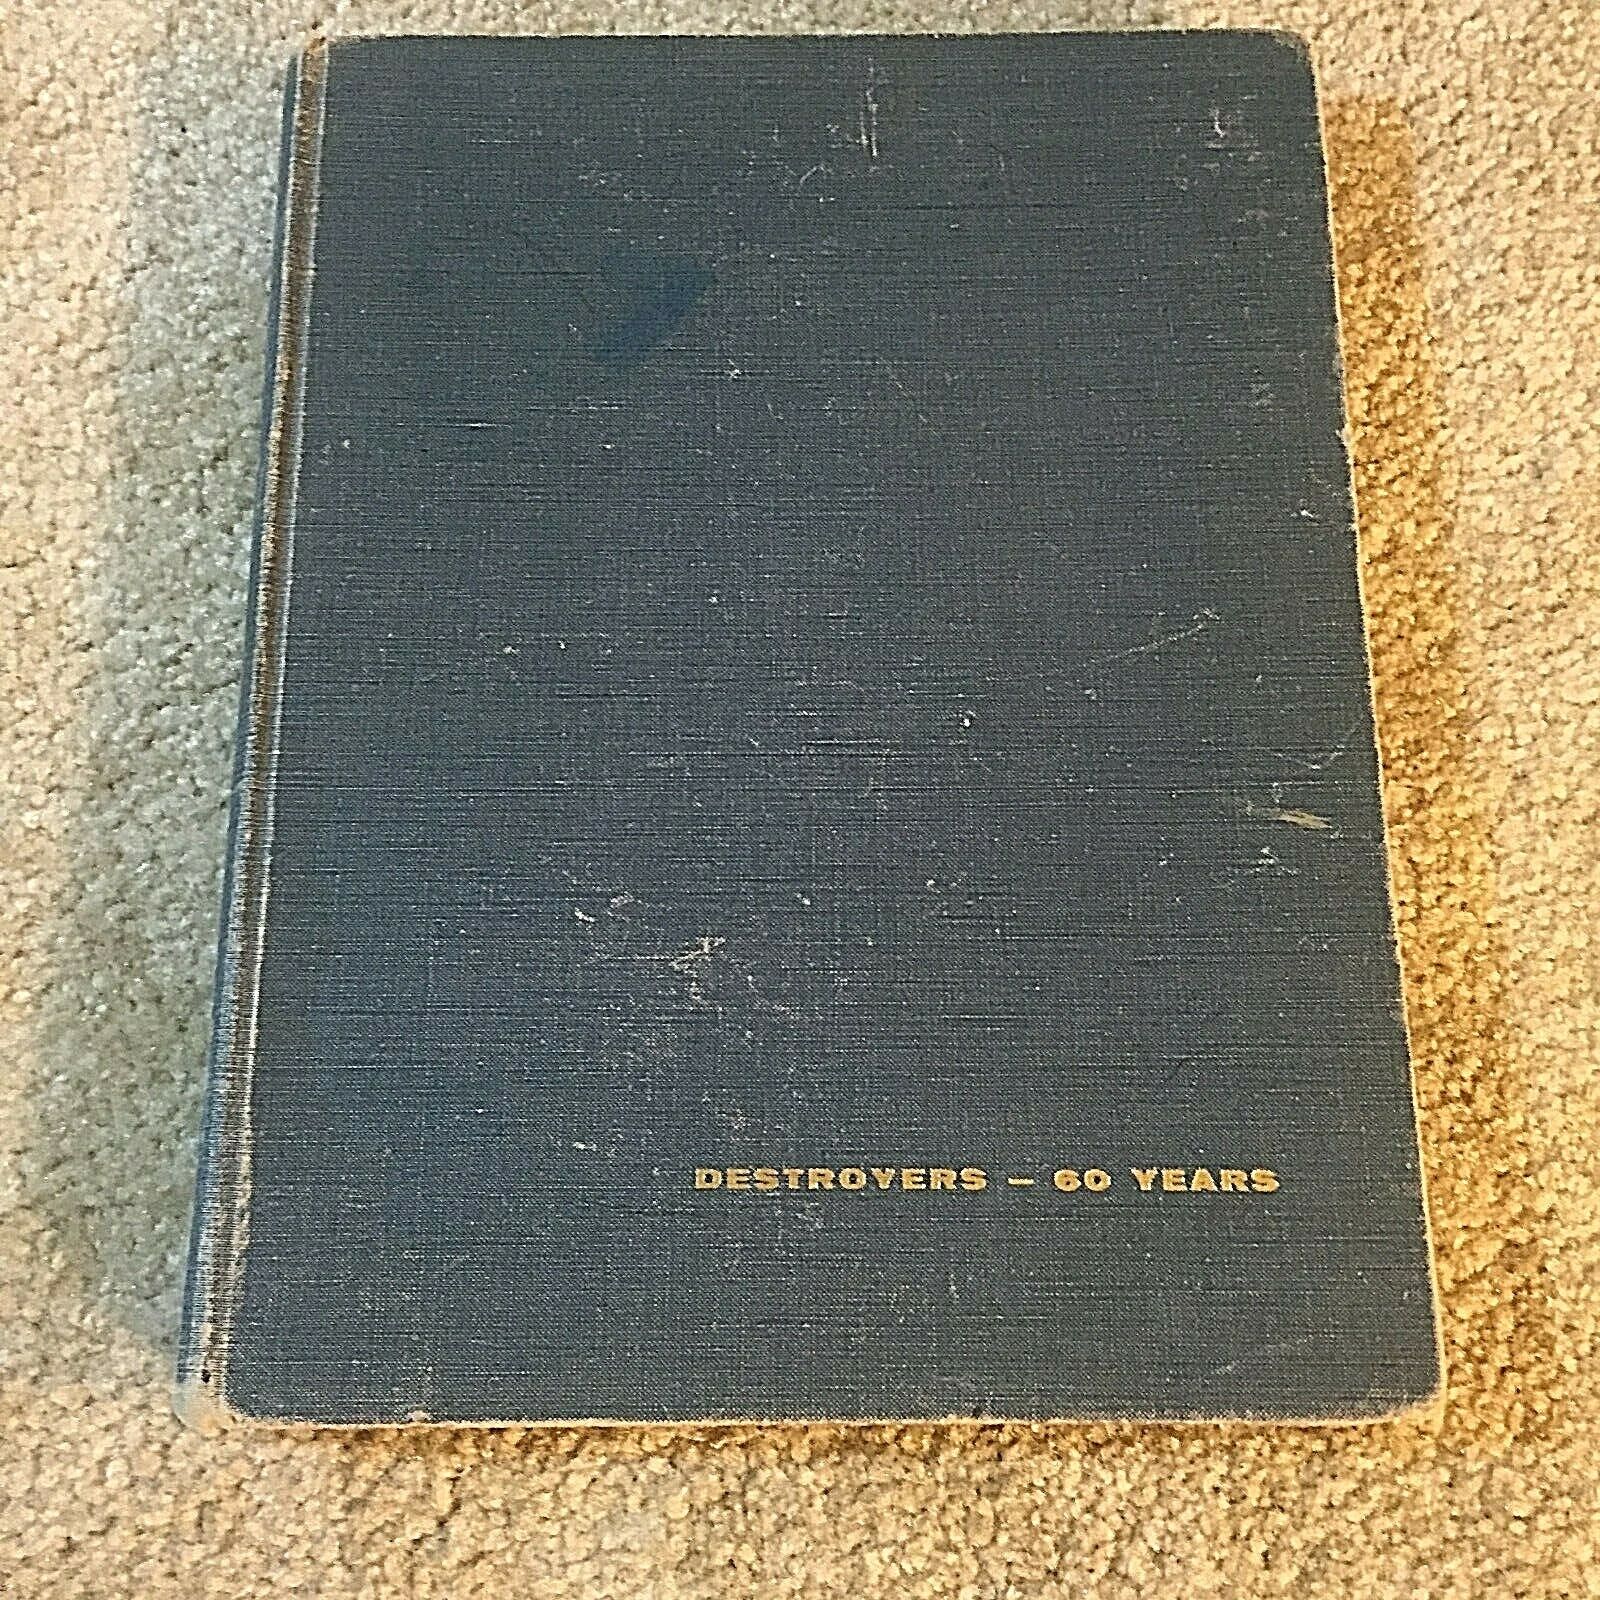 DESTROYERS 60 YEARS BOOK by William SCHOFIELD CAPT RAND MCNALLLY